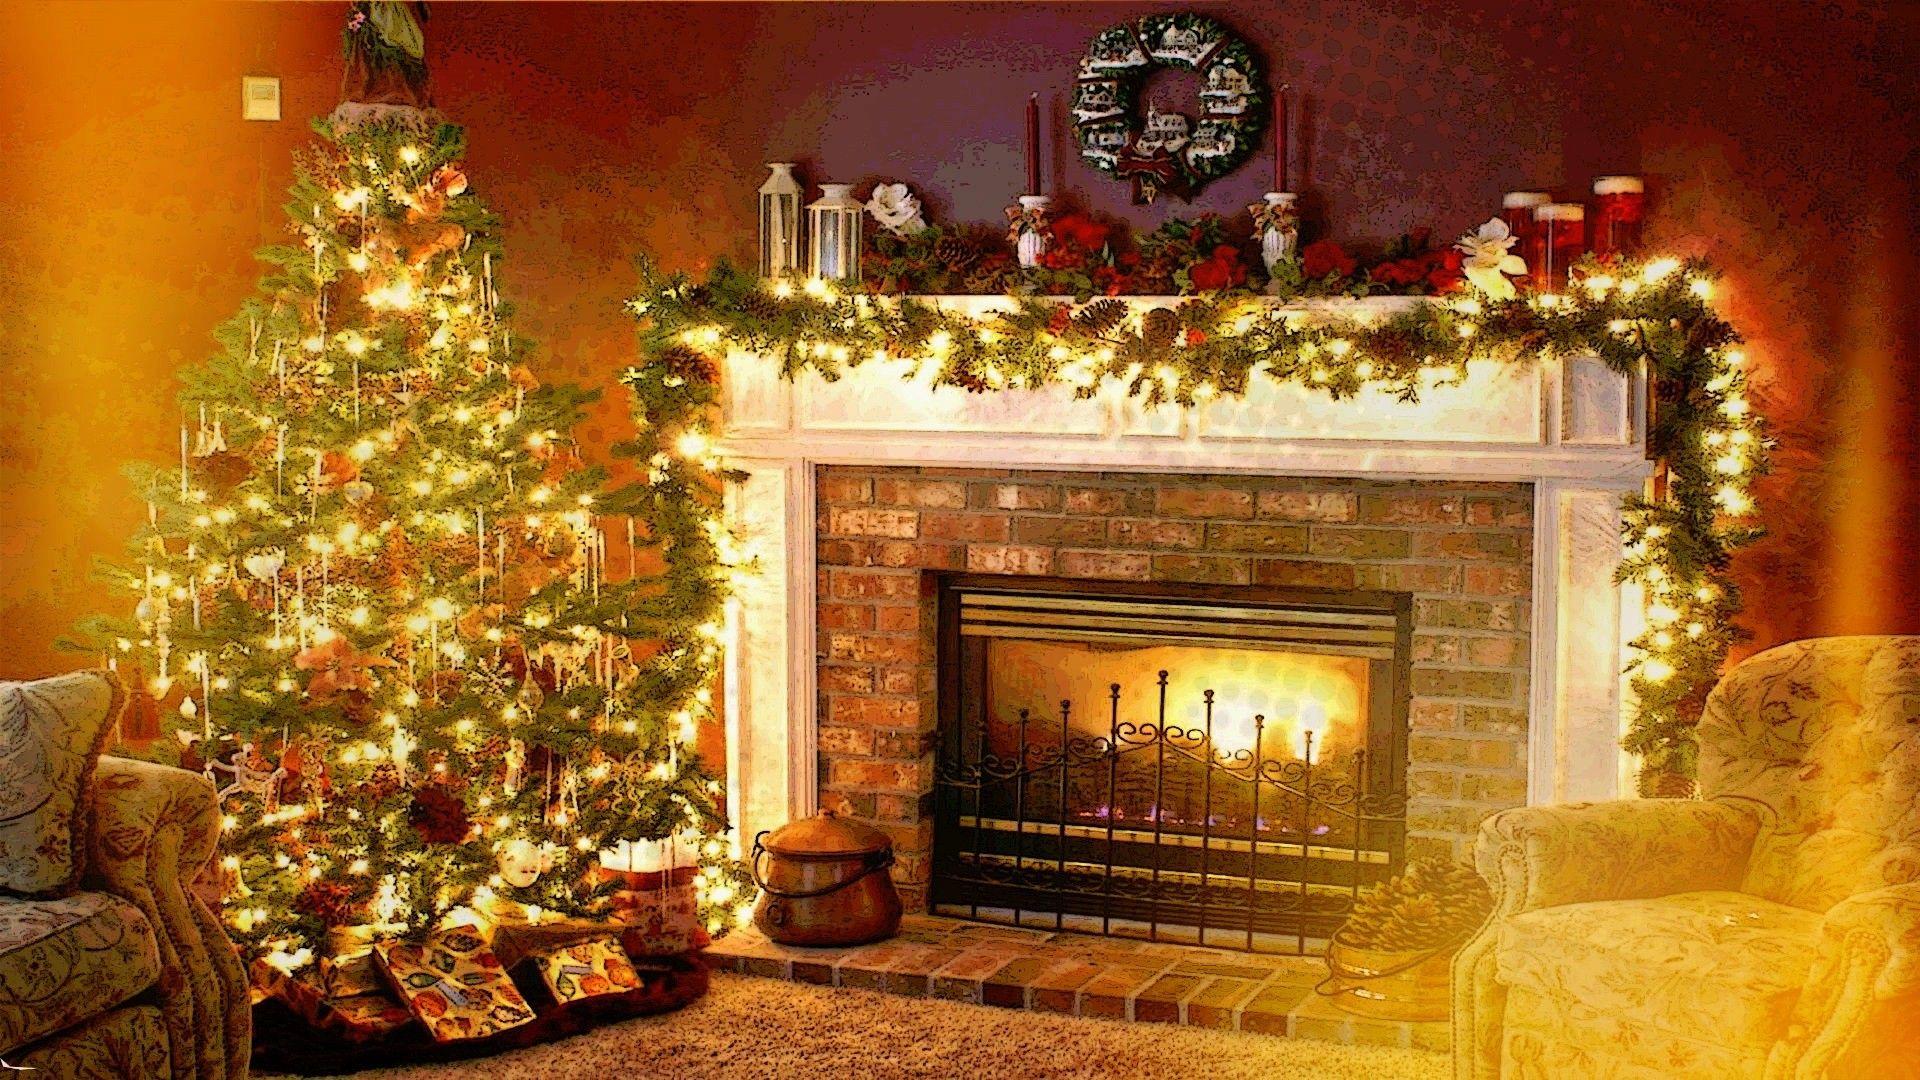 Living Room at Christmastime HD Wallpaper. Background Image